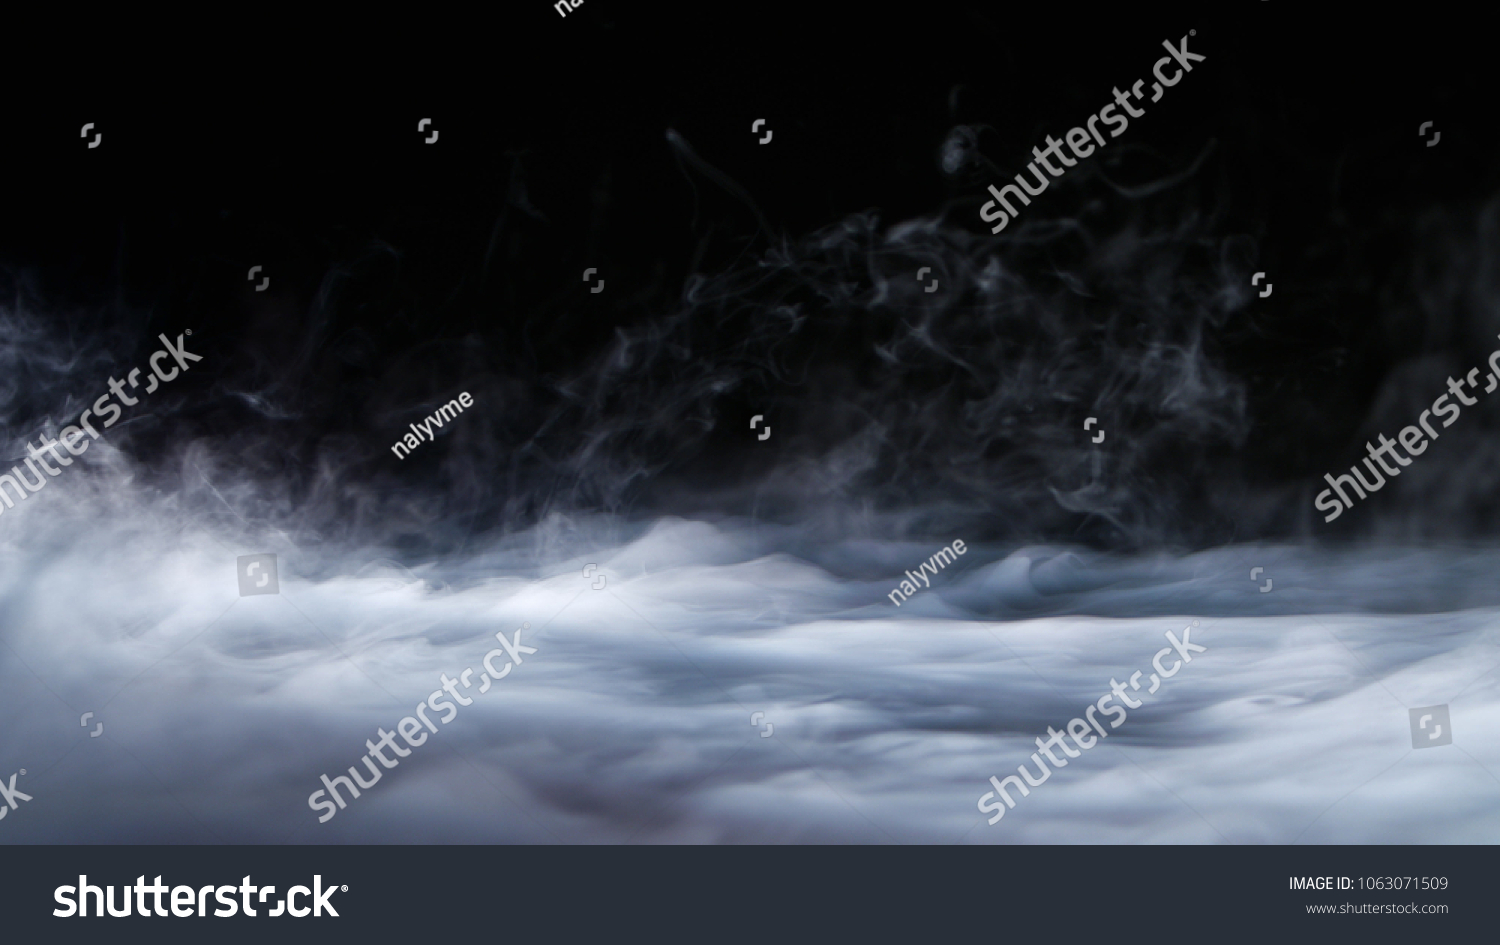 Realistic dry ice smoke clouds fog overlay perfect for compositing into your shots. Simply drop it in and change its blending mode to screen or add. #1063071509